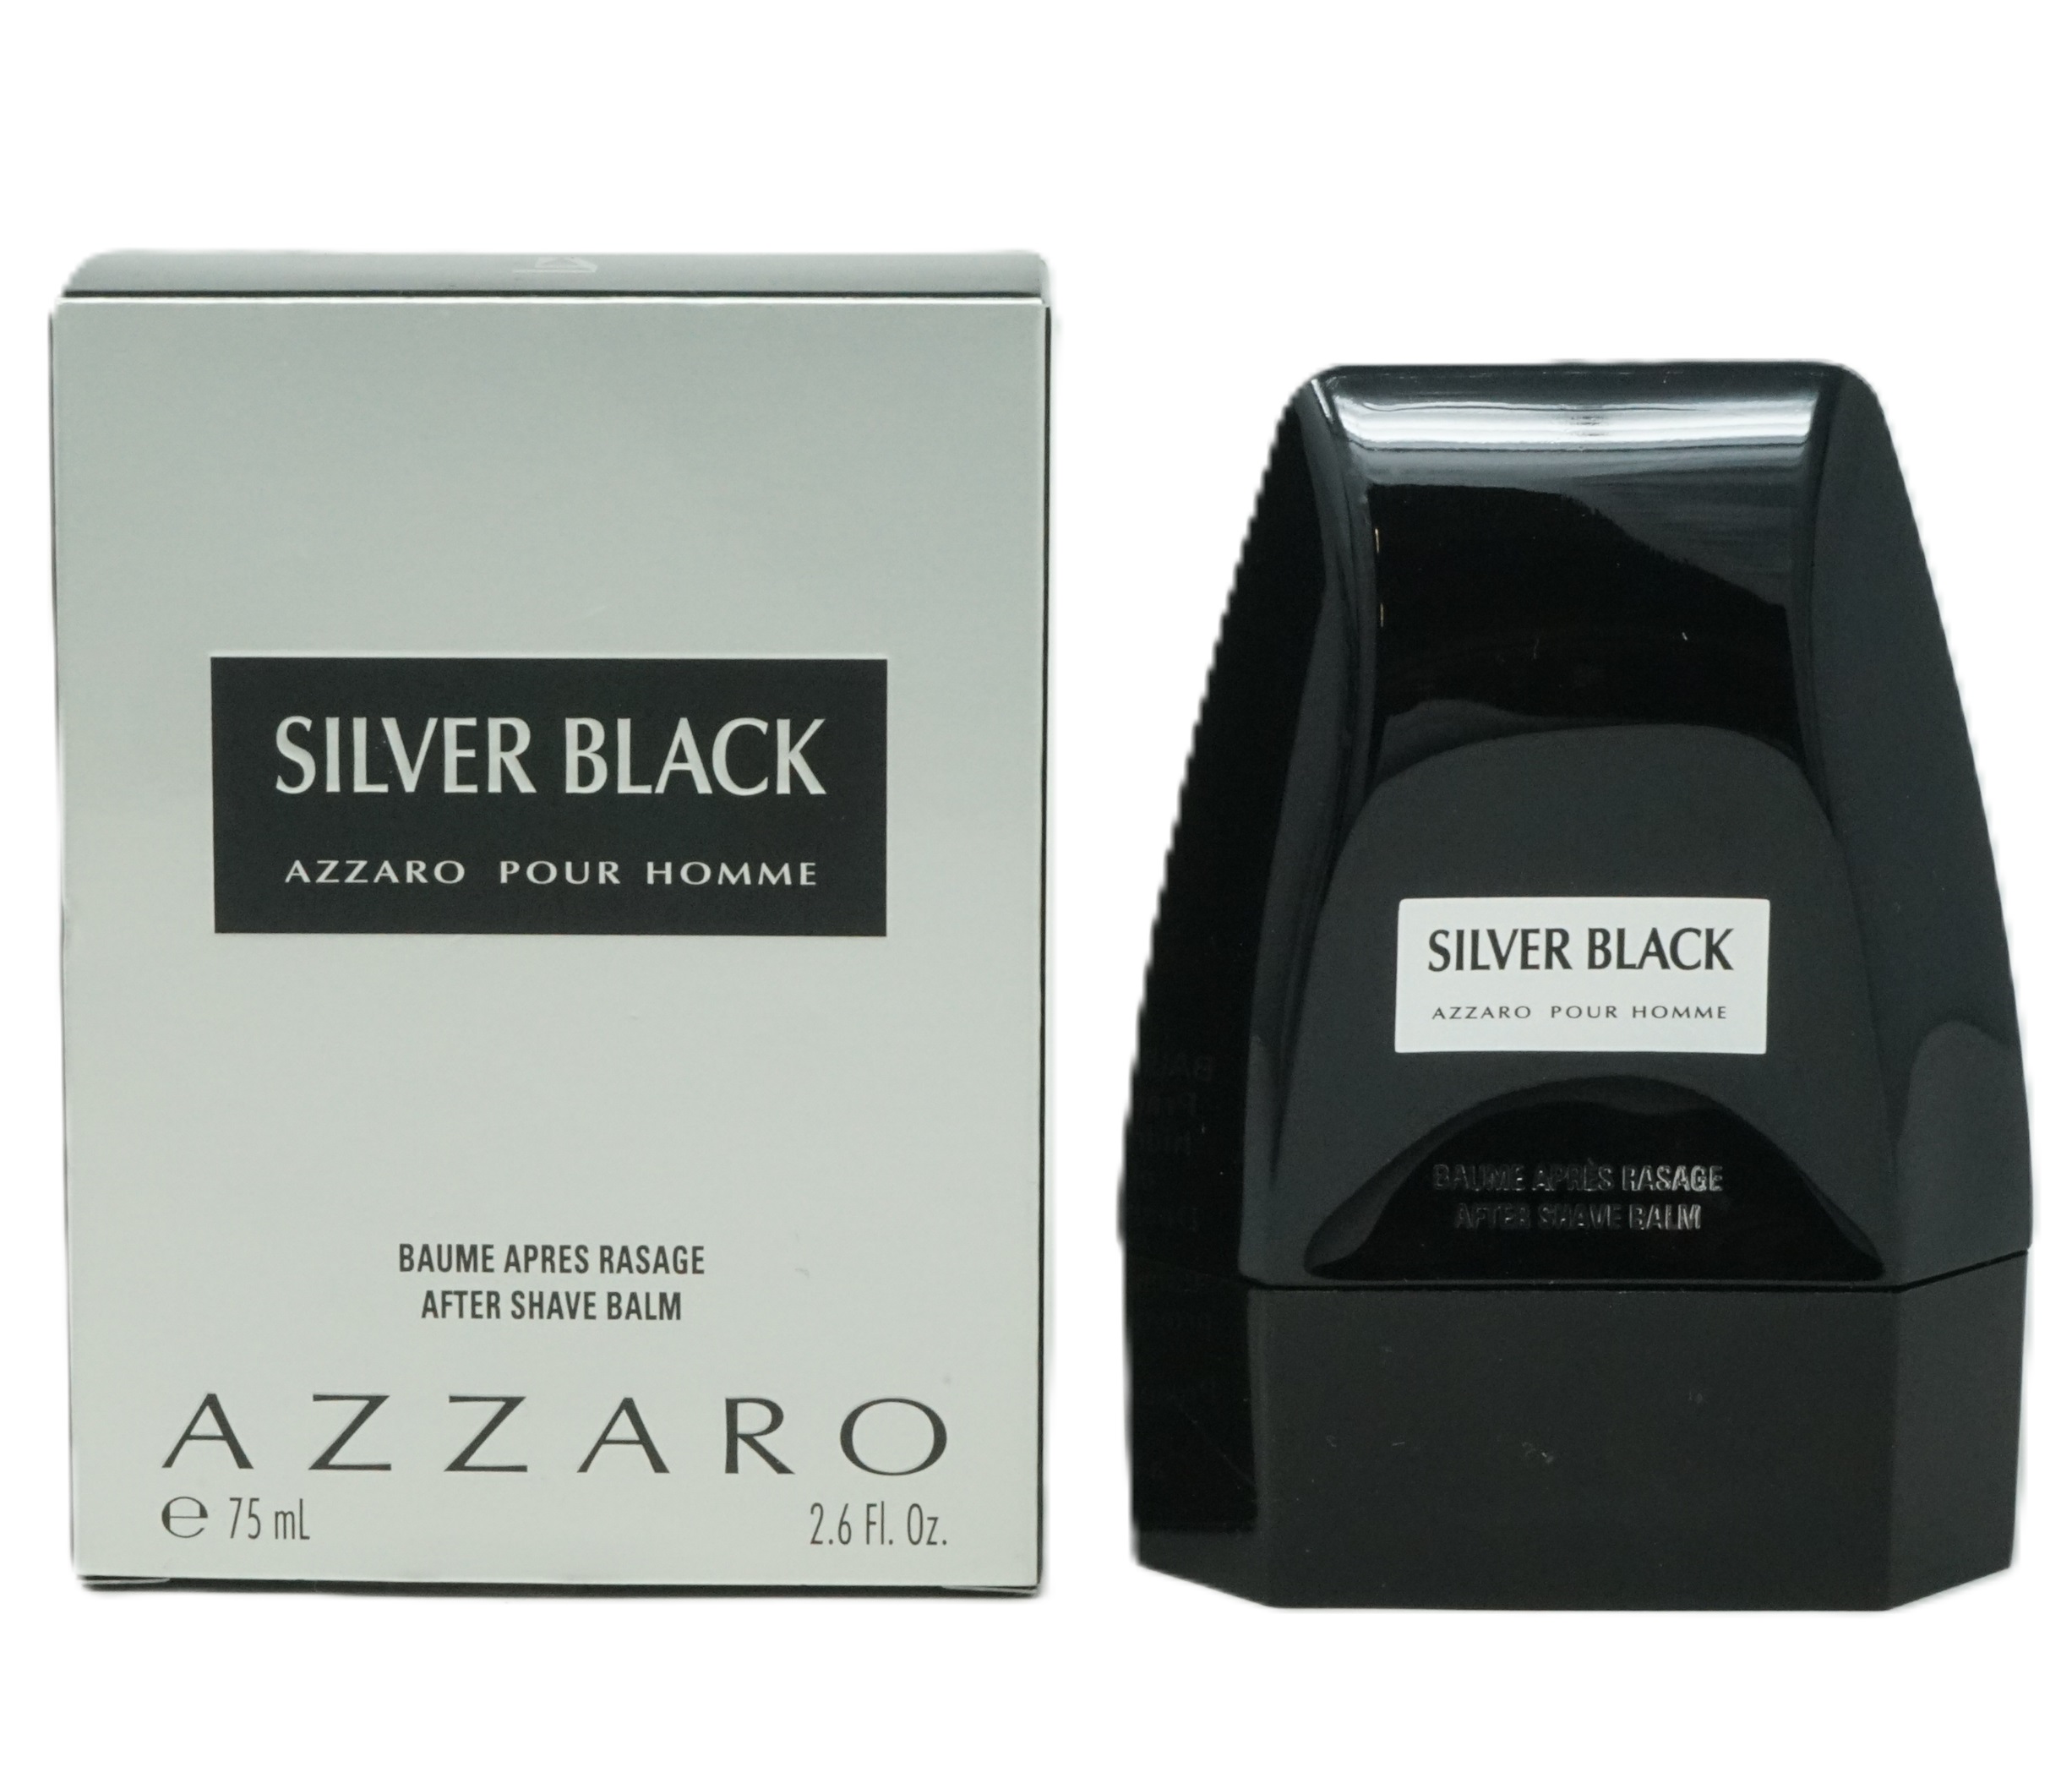 Azzaro silver Black After Shave Balm 75ml